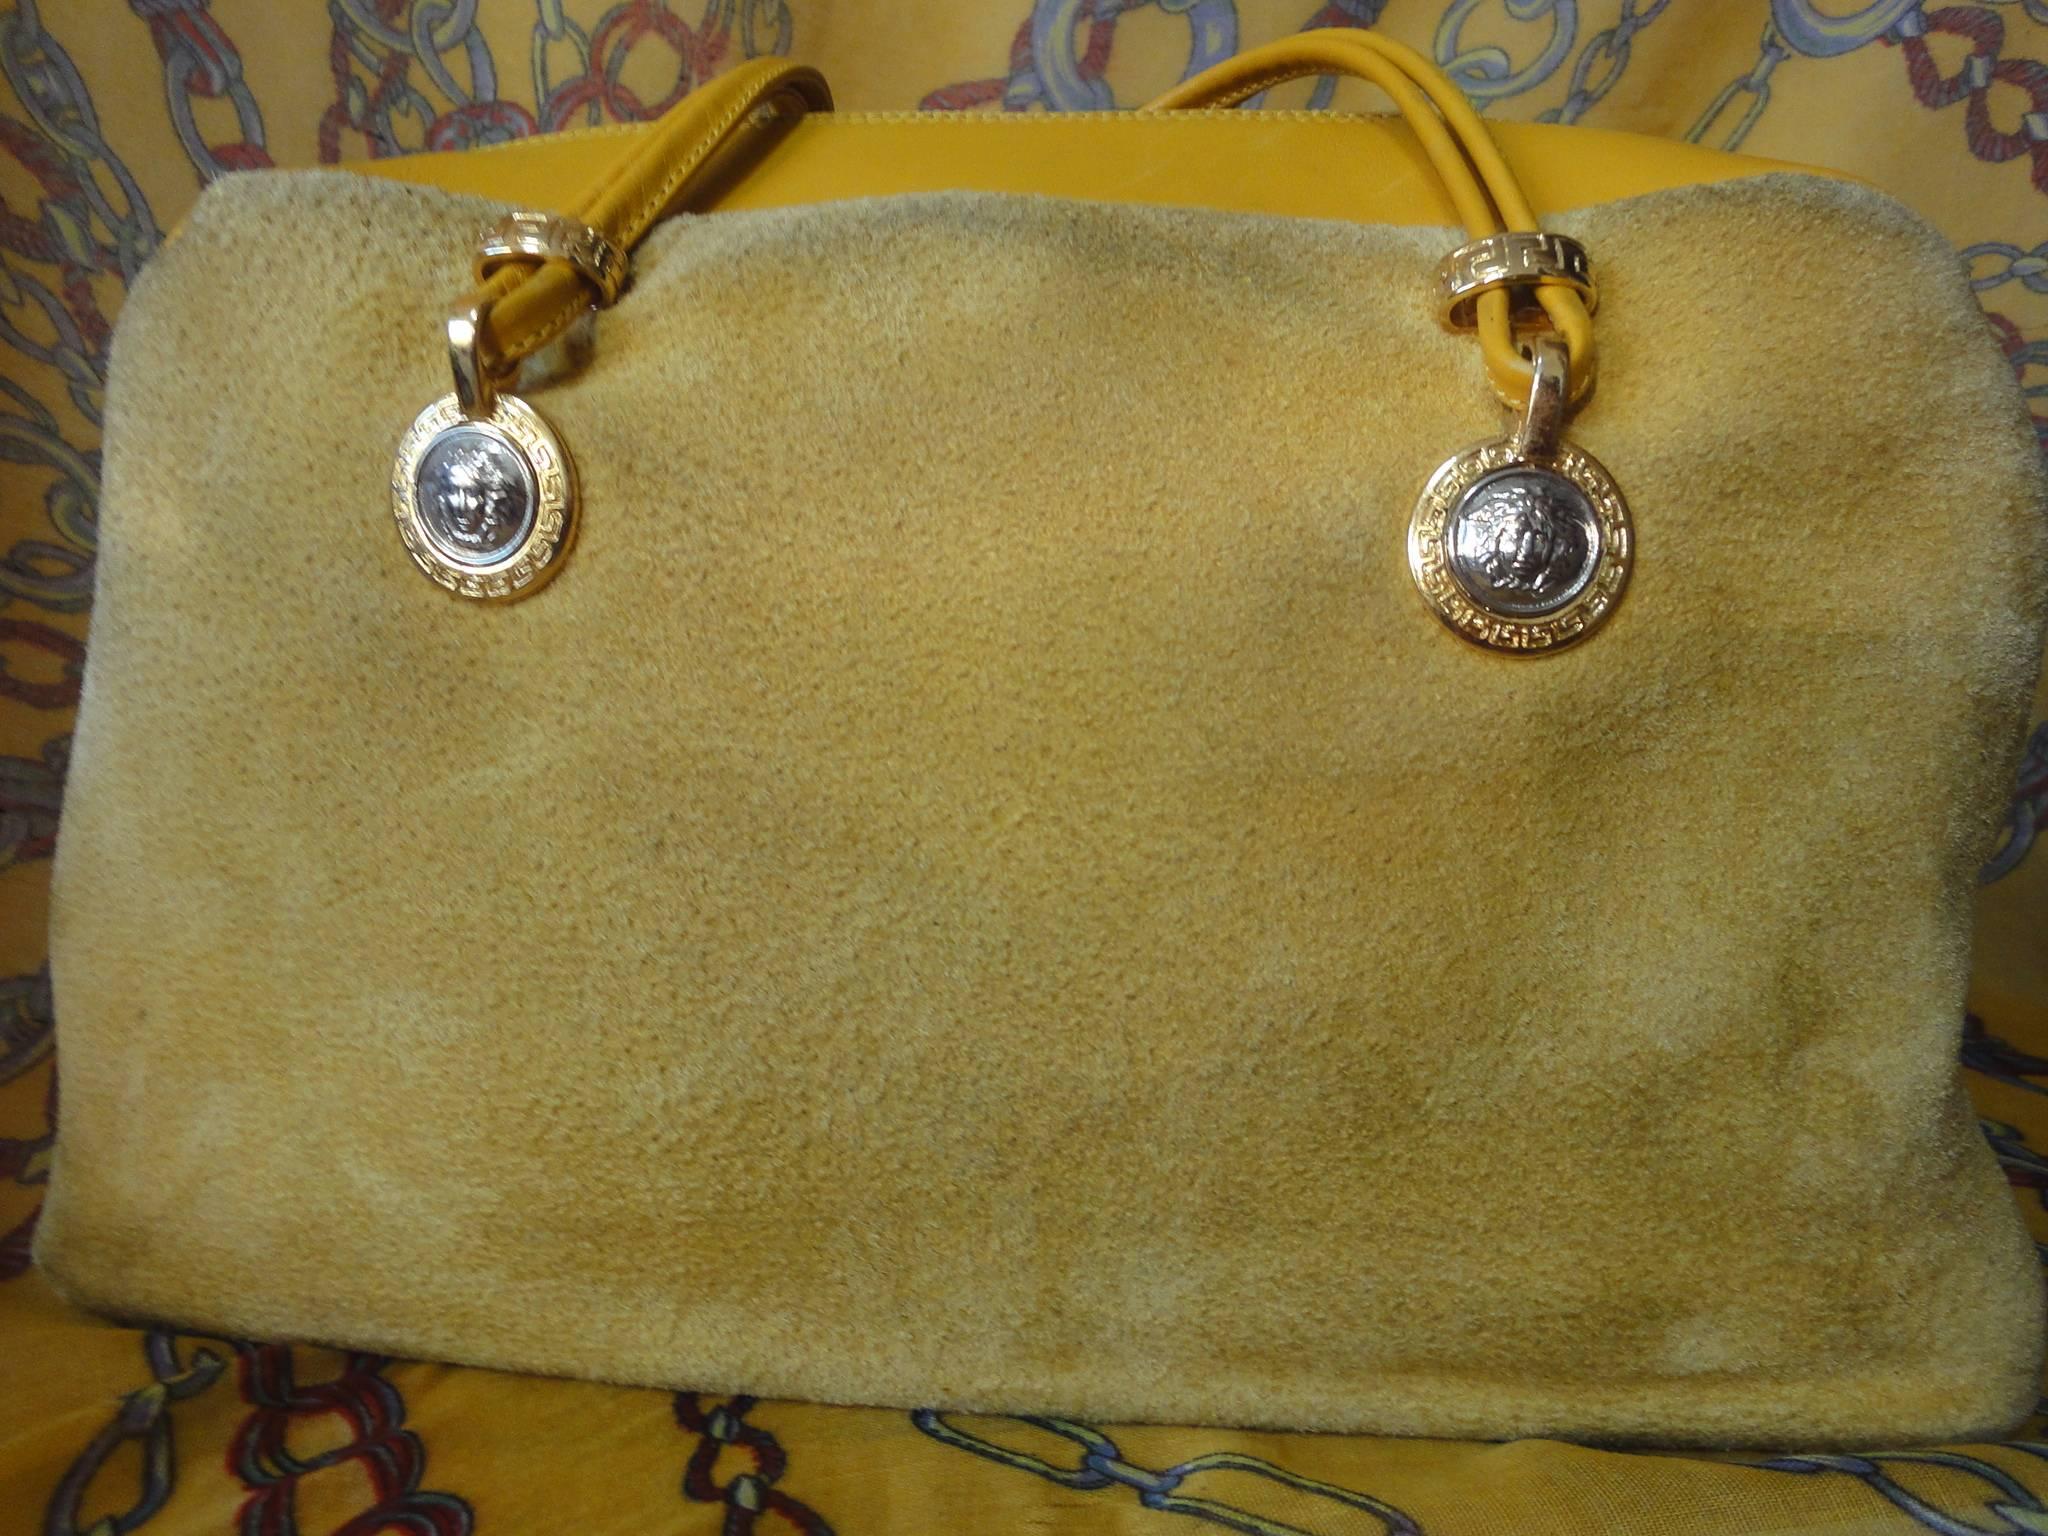 yellow suede bag